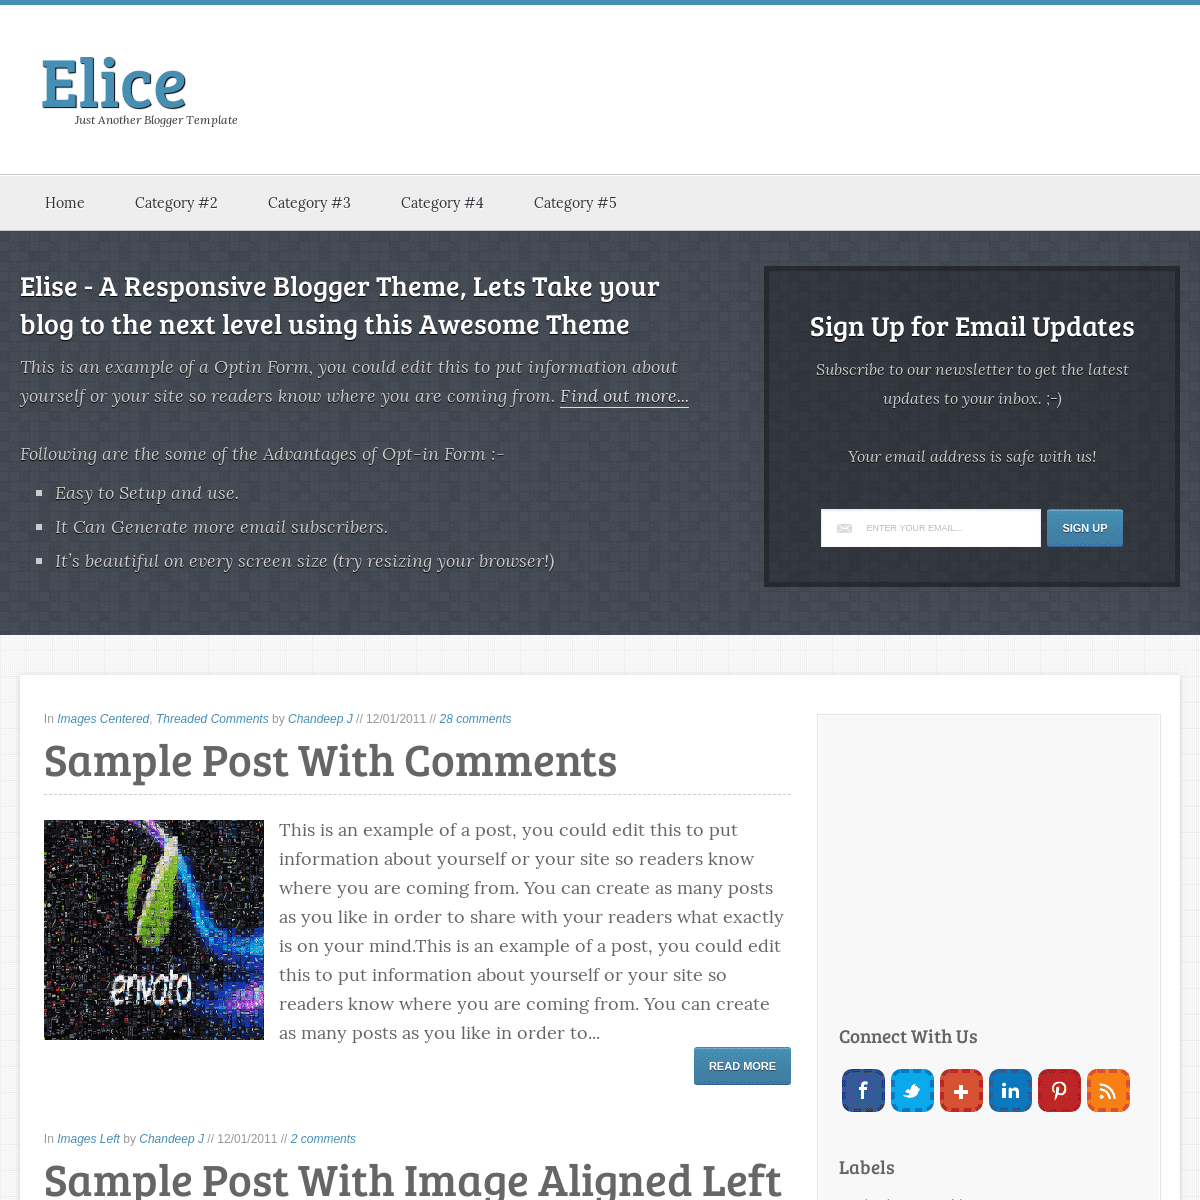 A complete backup of elice-blogger-theme.blogspot.com